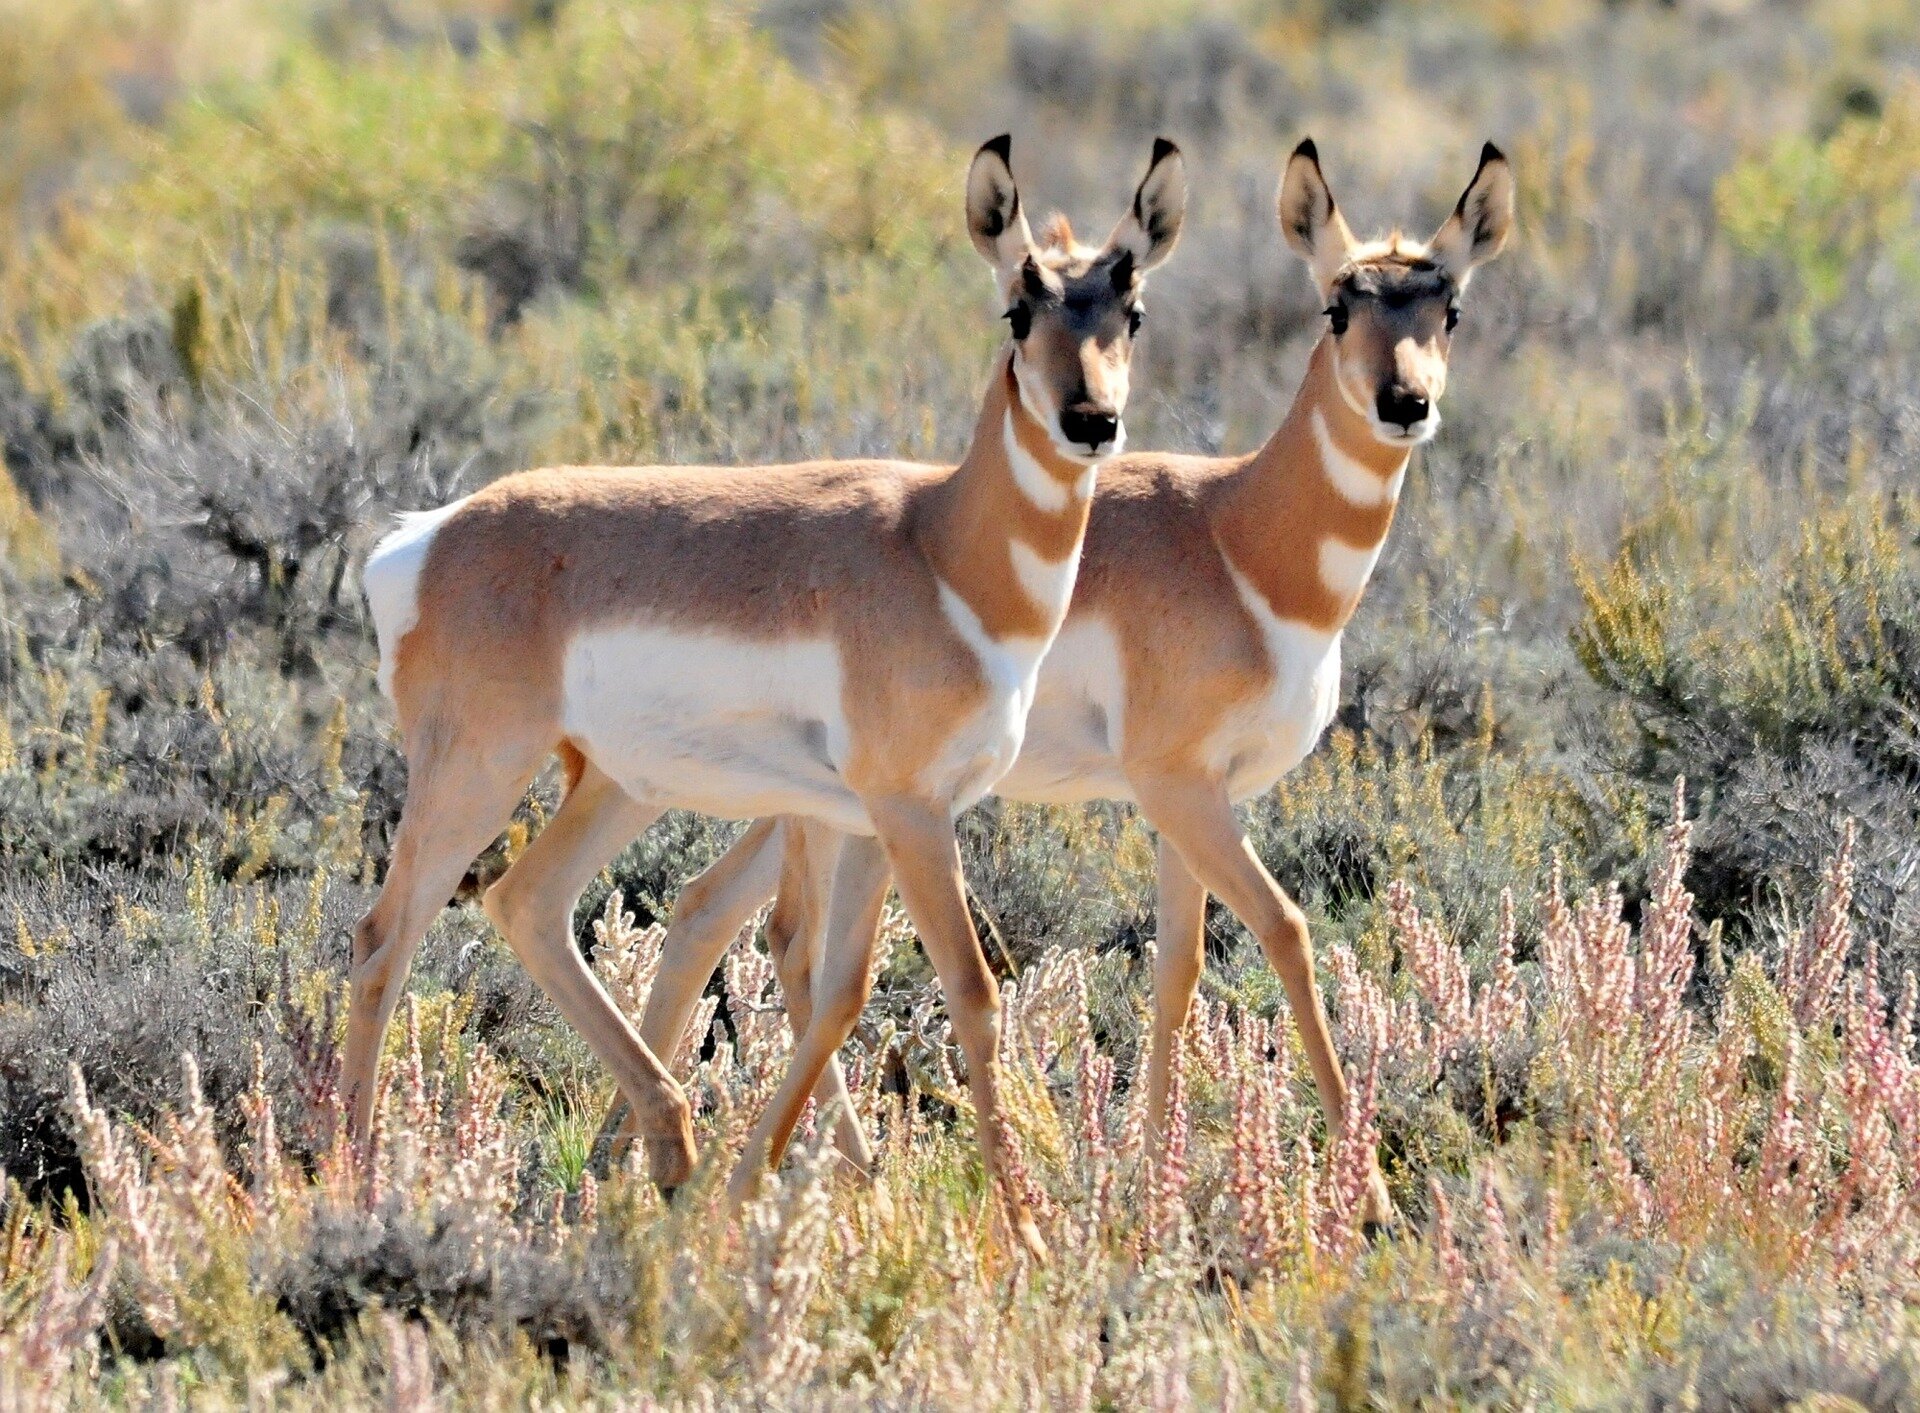 Desert mystery: Why have pronghorn antelope returned to ...